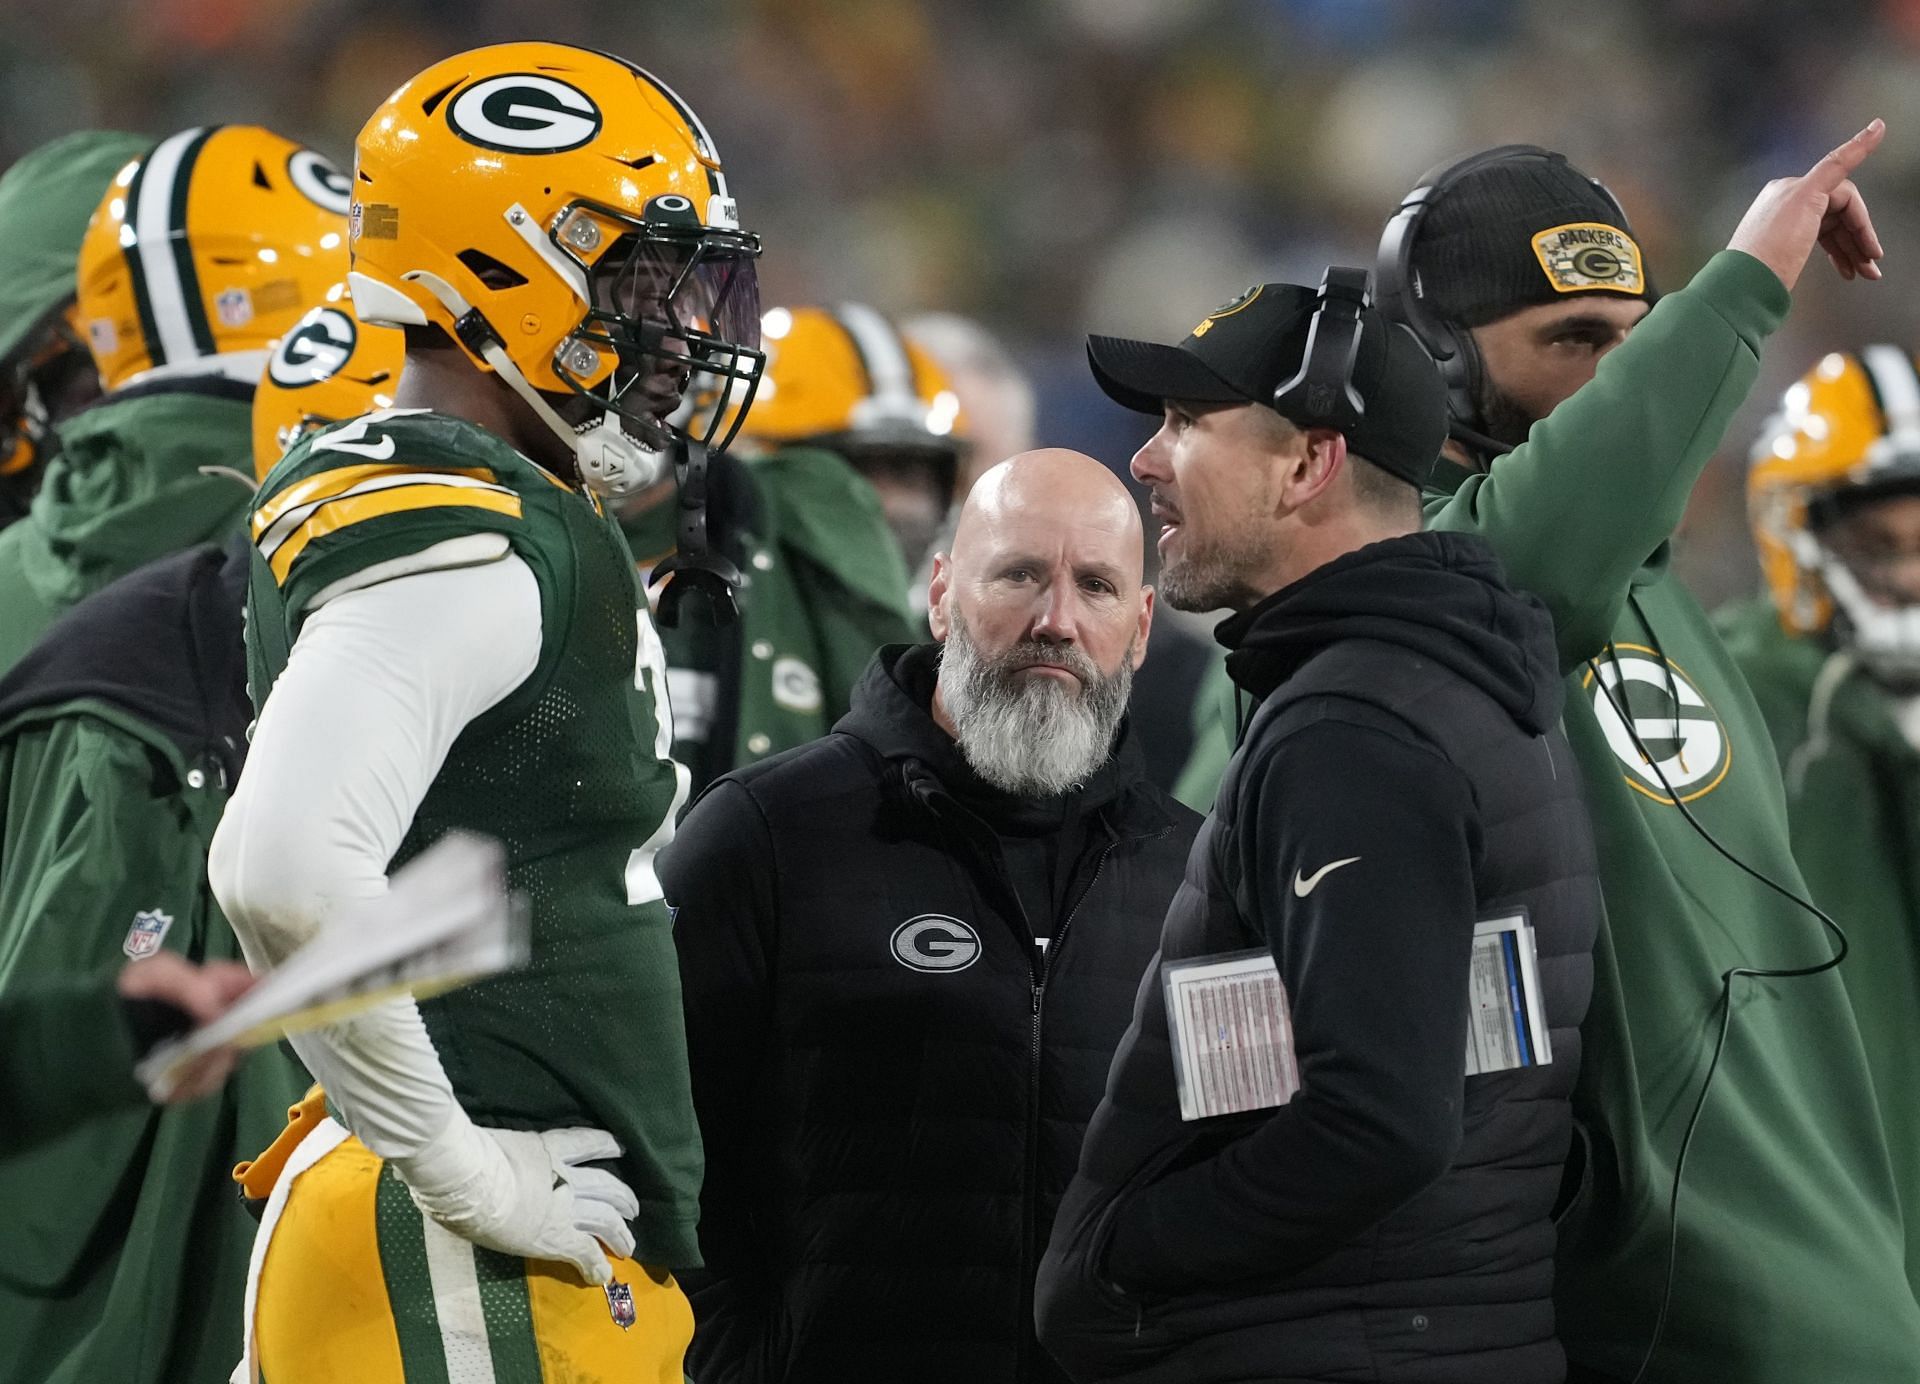 NFL spokesperson clarifies league stance on clock error in Packers-Lions  game